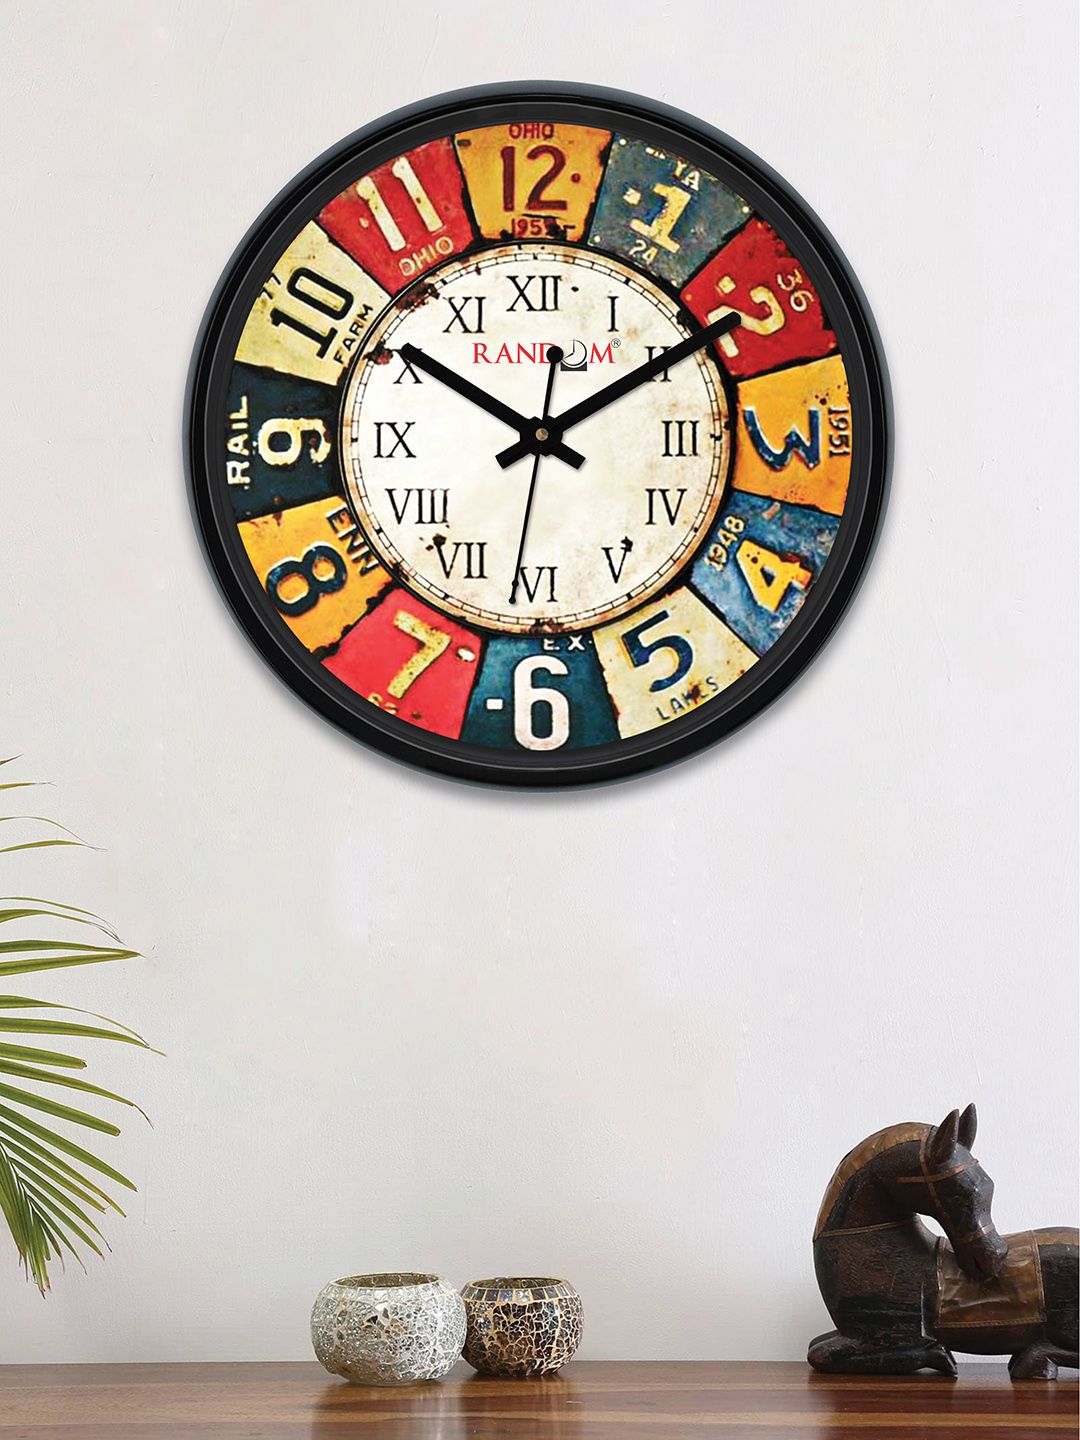 RANDOM Multicoloured Round Printed Analogue Wall Clock 30 cm Price in India